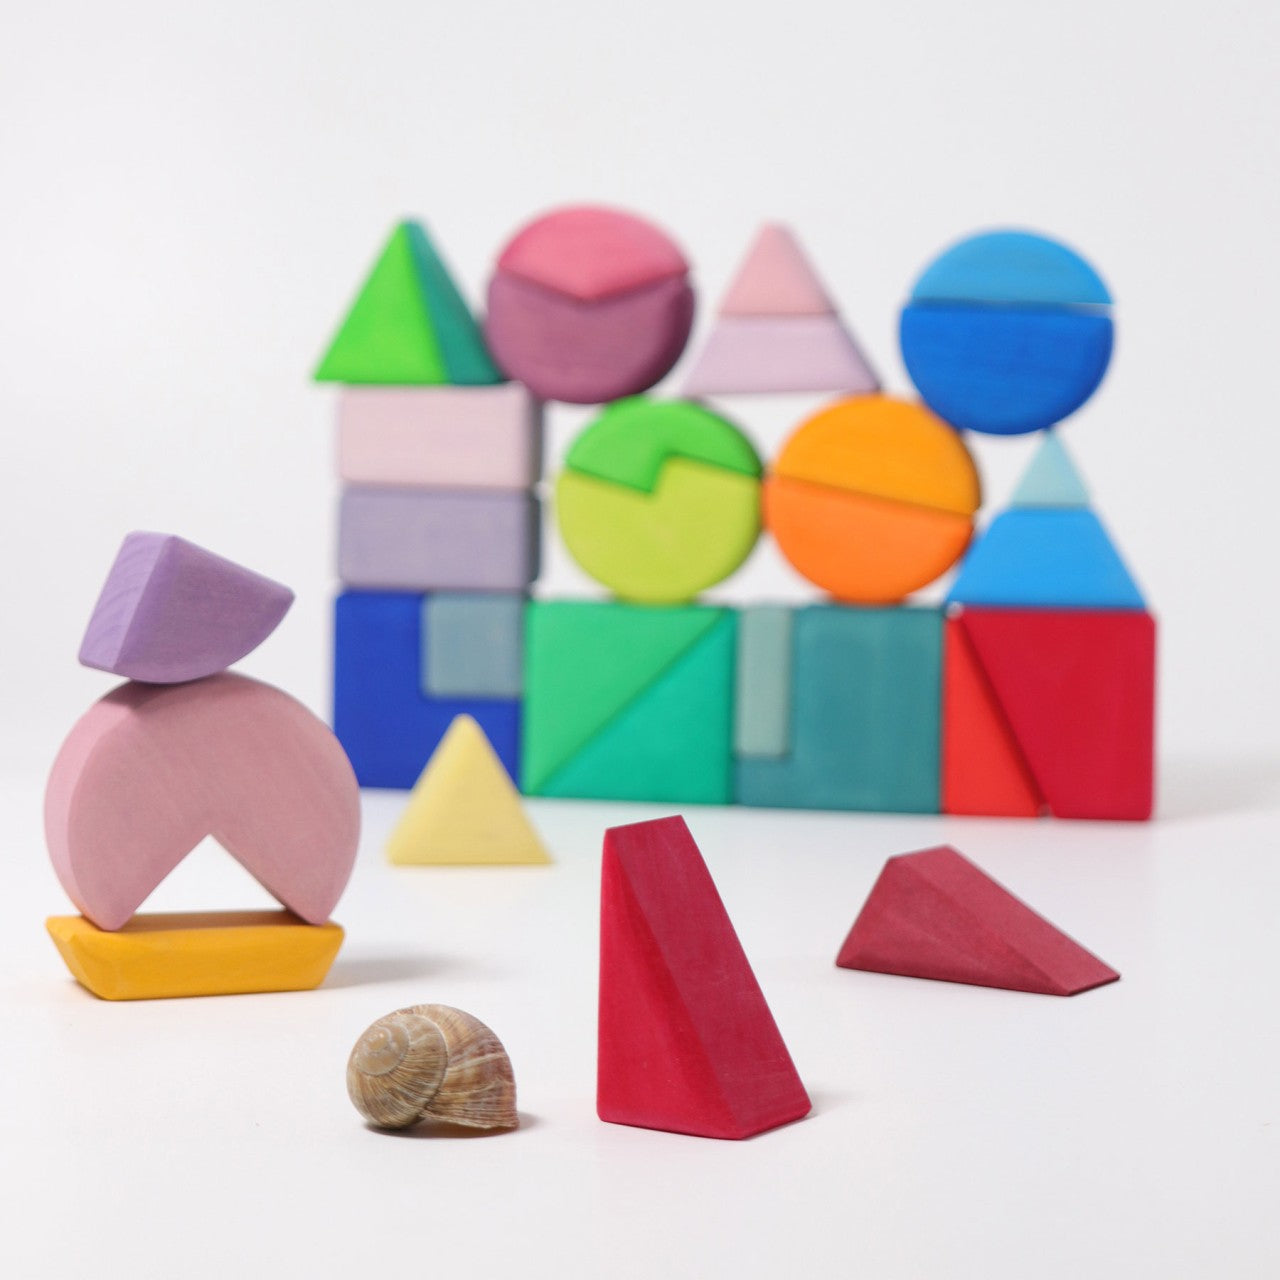 Triangle, Square, Circle | Wooden Puzzle & Building Set | Open-Ended Play